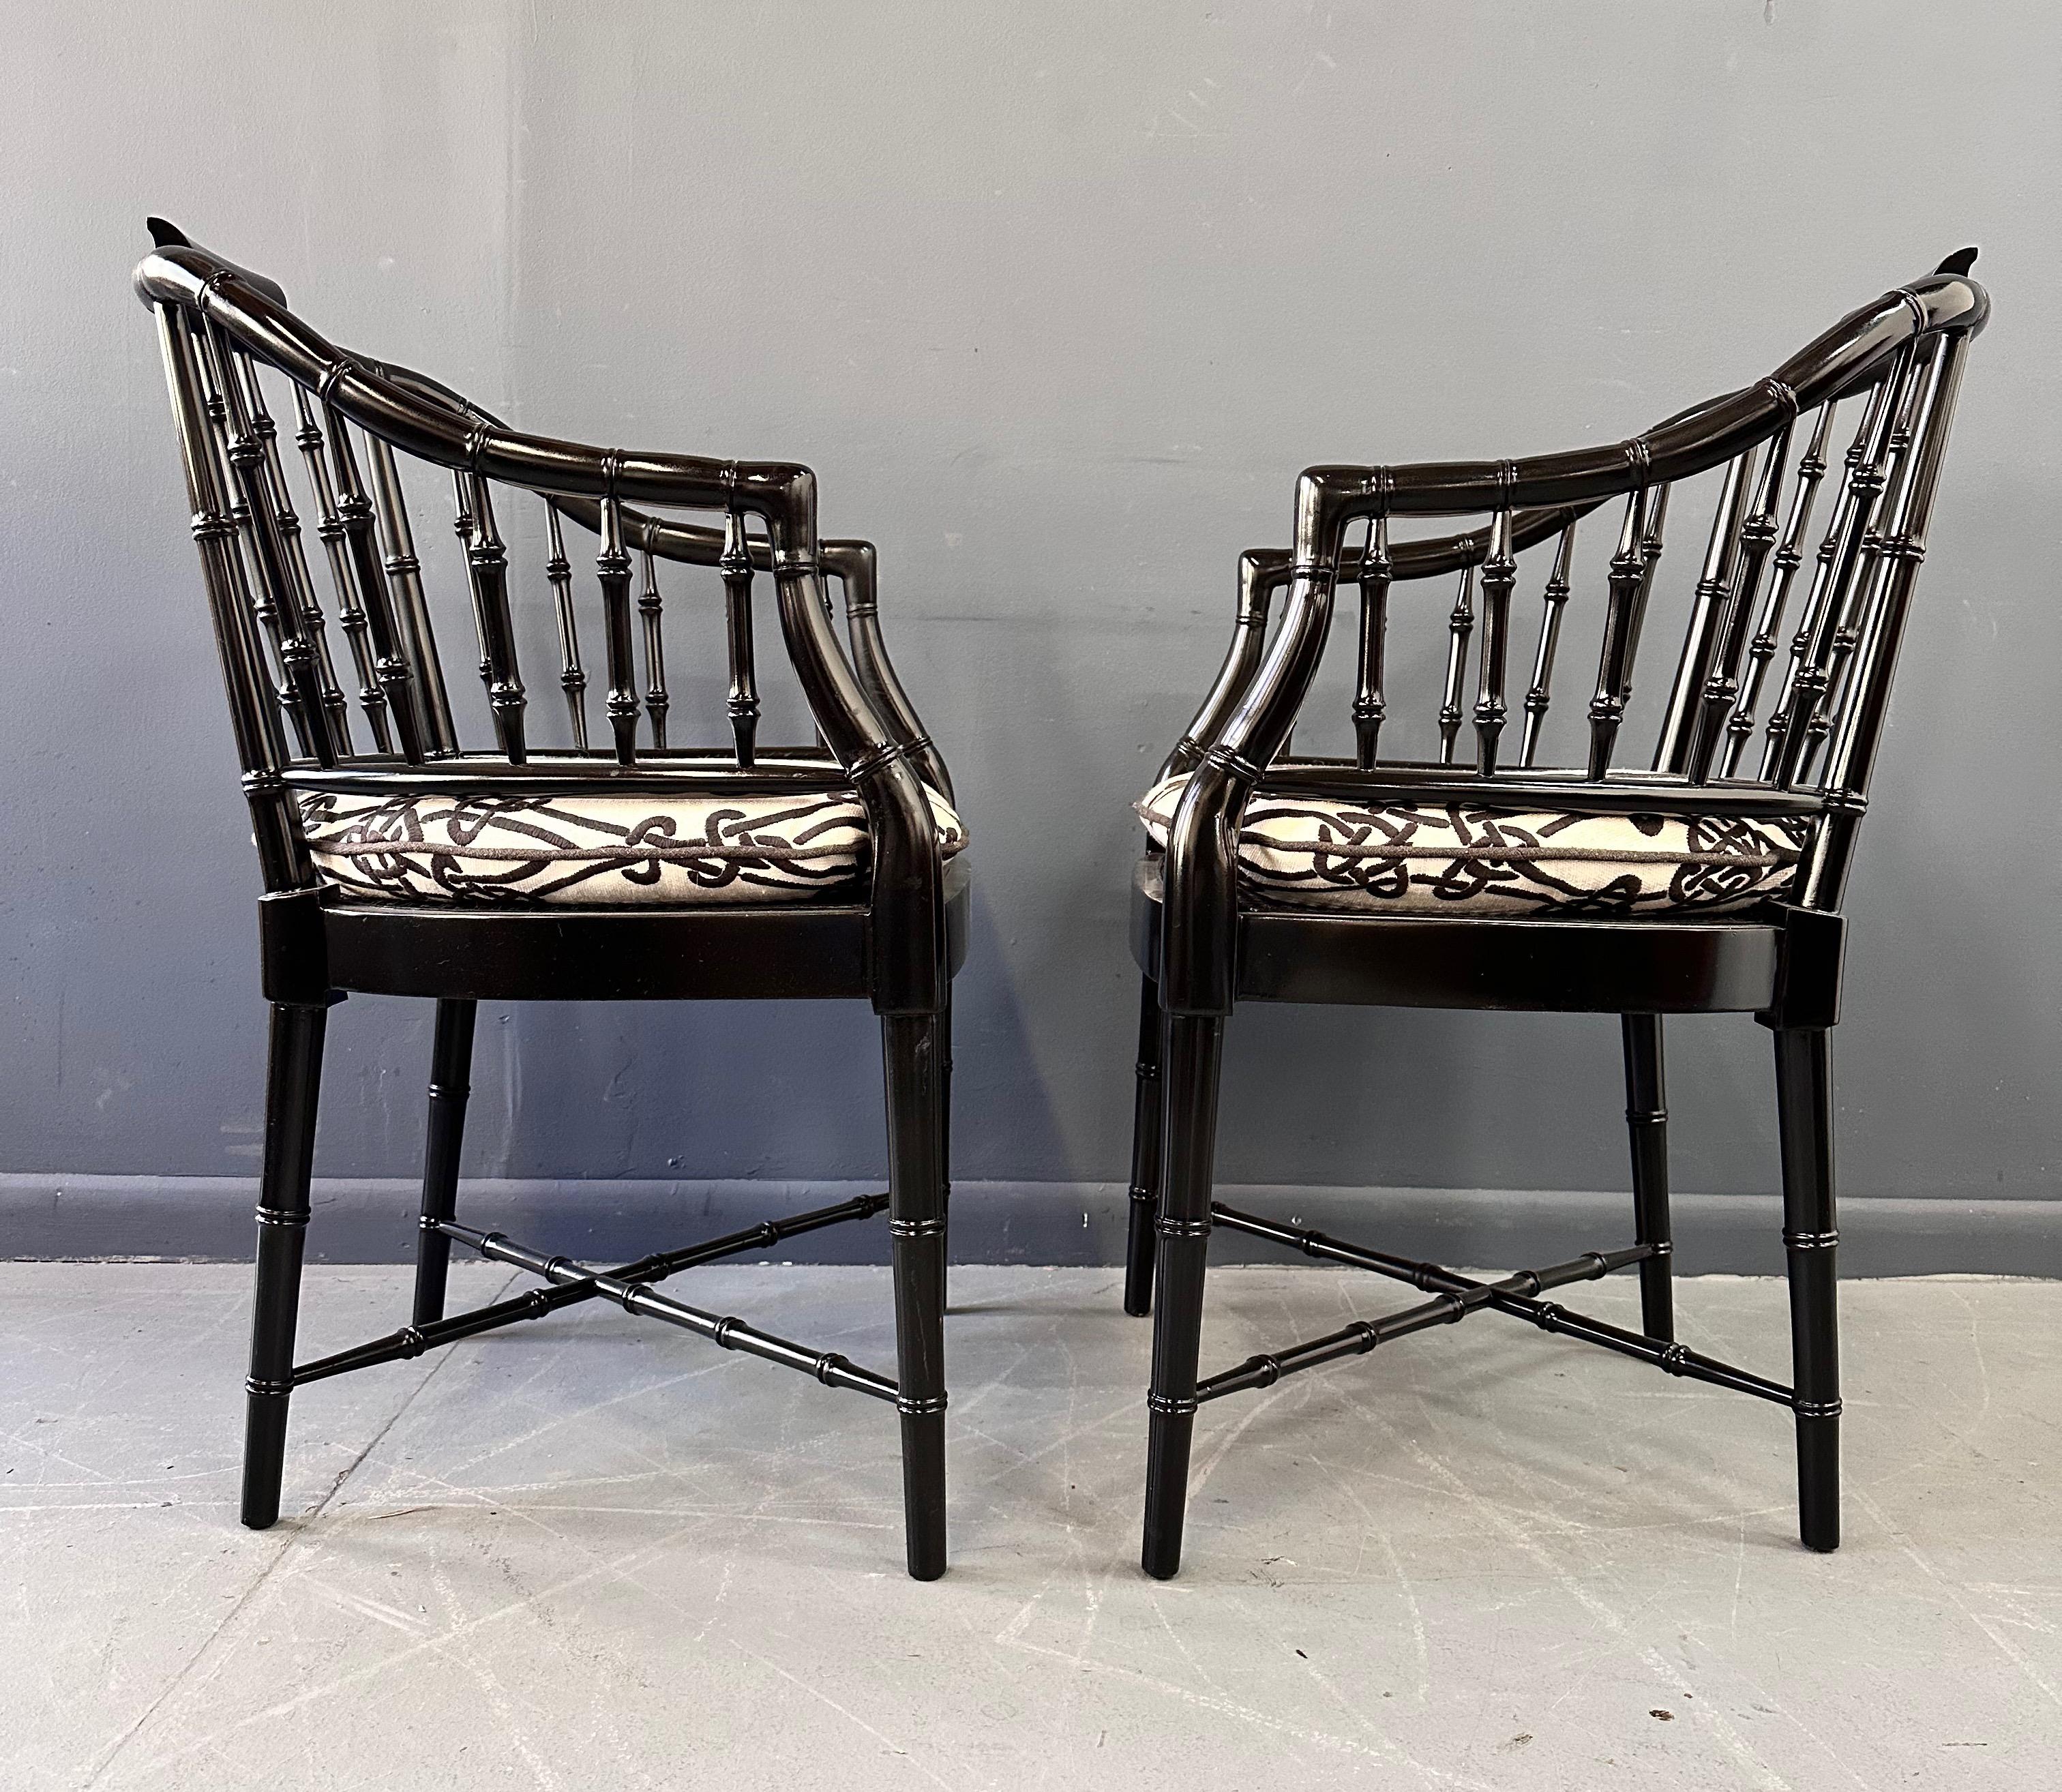 A Classic looking Asian styled chair produced by Baker Furniture in the 1960s. These feature, black lacquered solid wood construction with custom sewed cushions. Clean and ready for use.